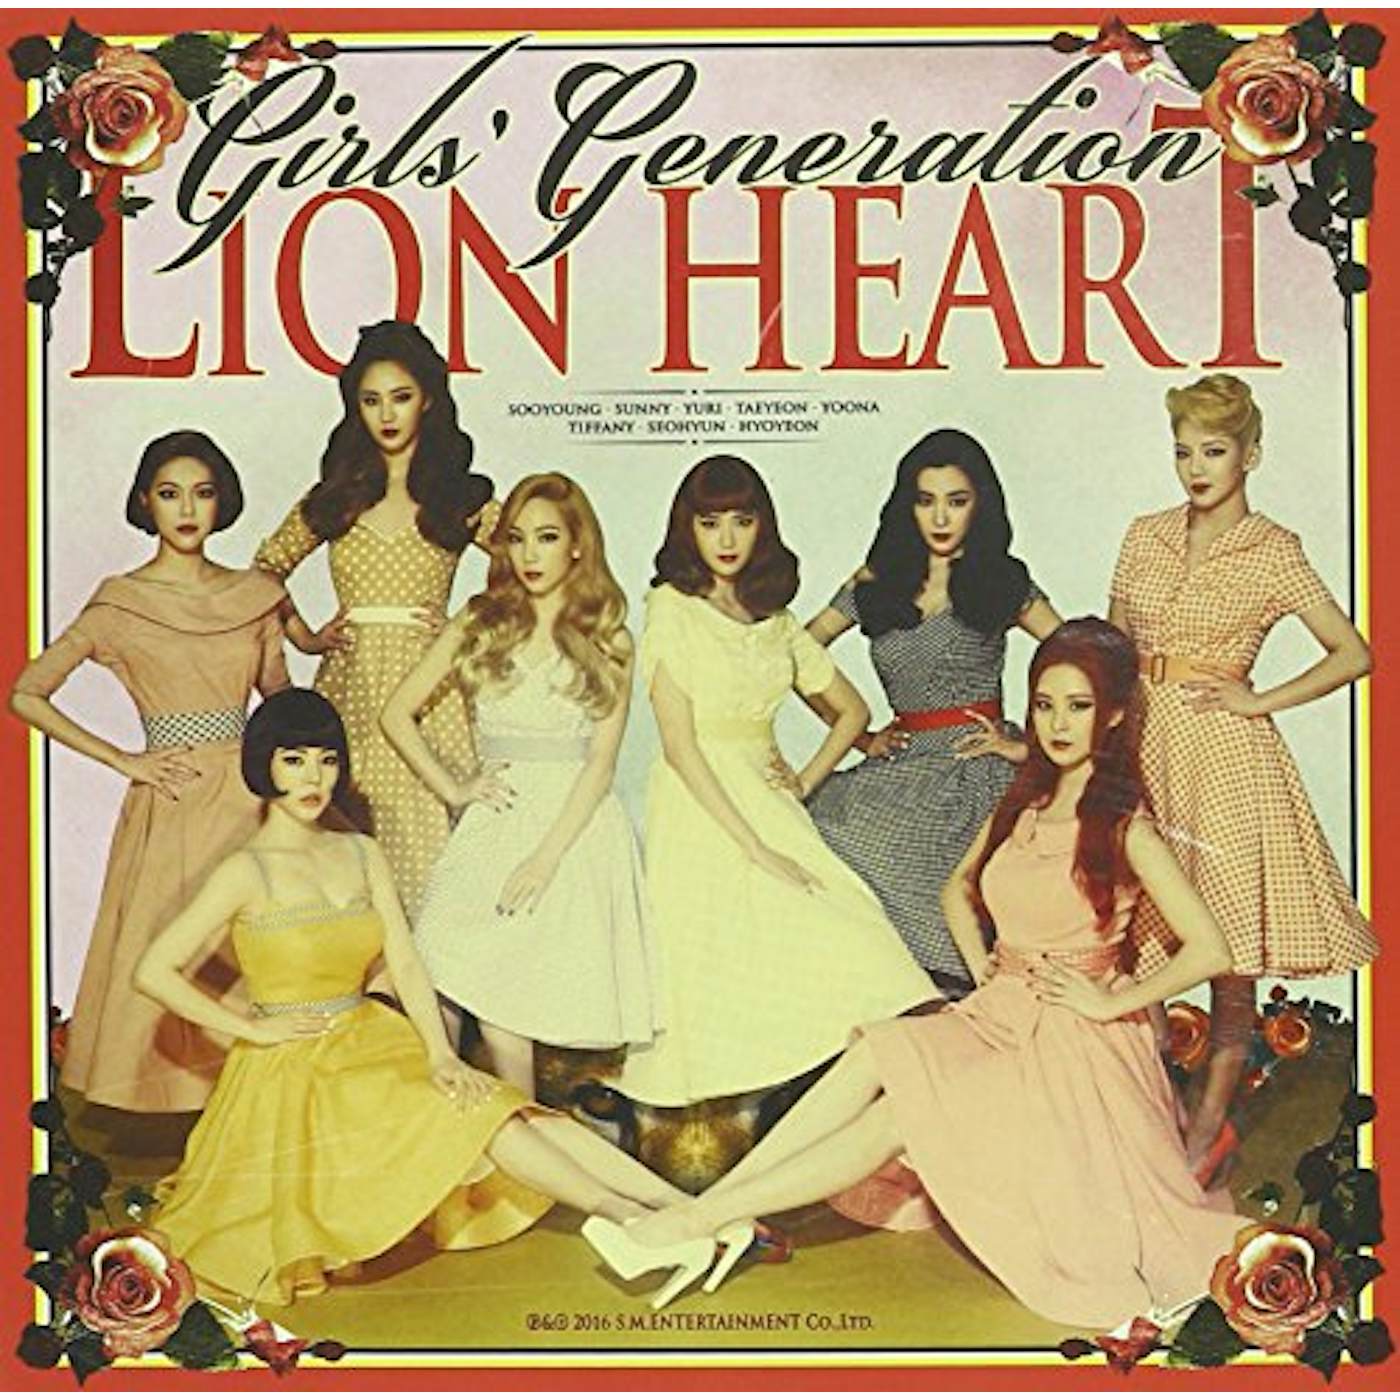 Girls' Generation LION HEART: LIMITED EDITION CD